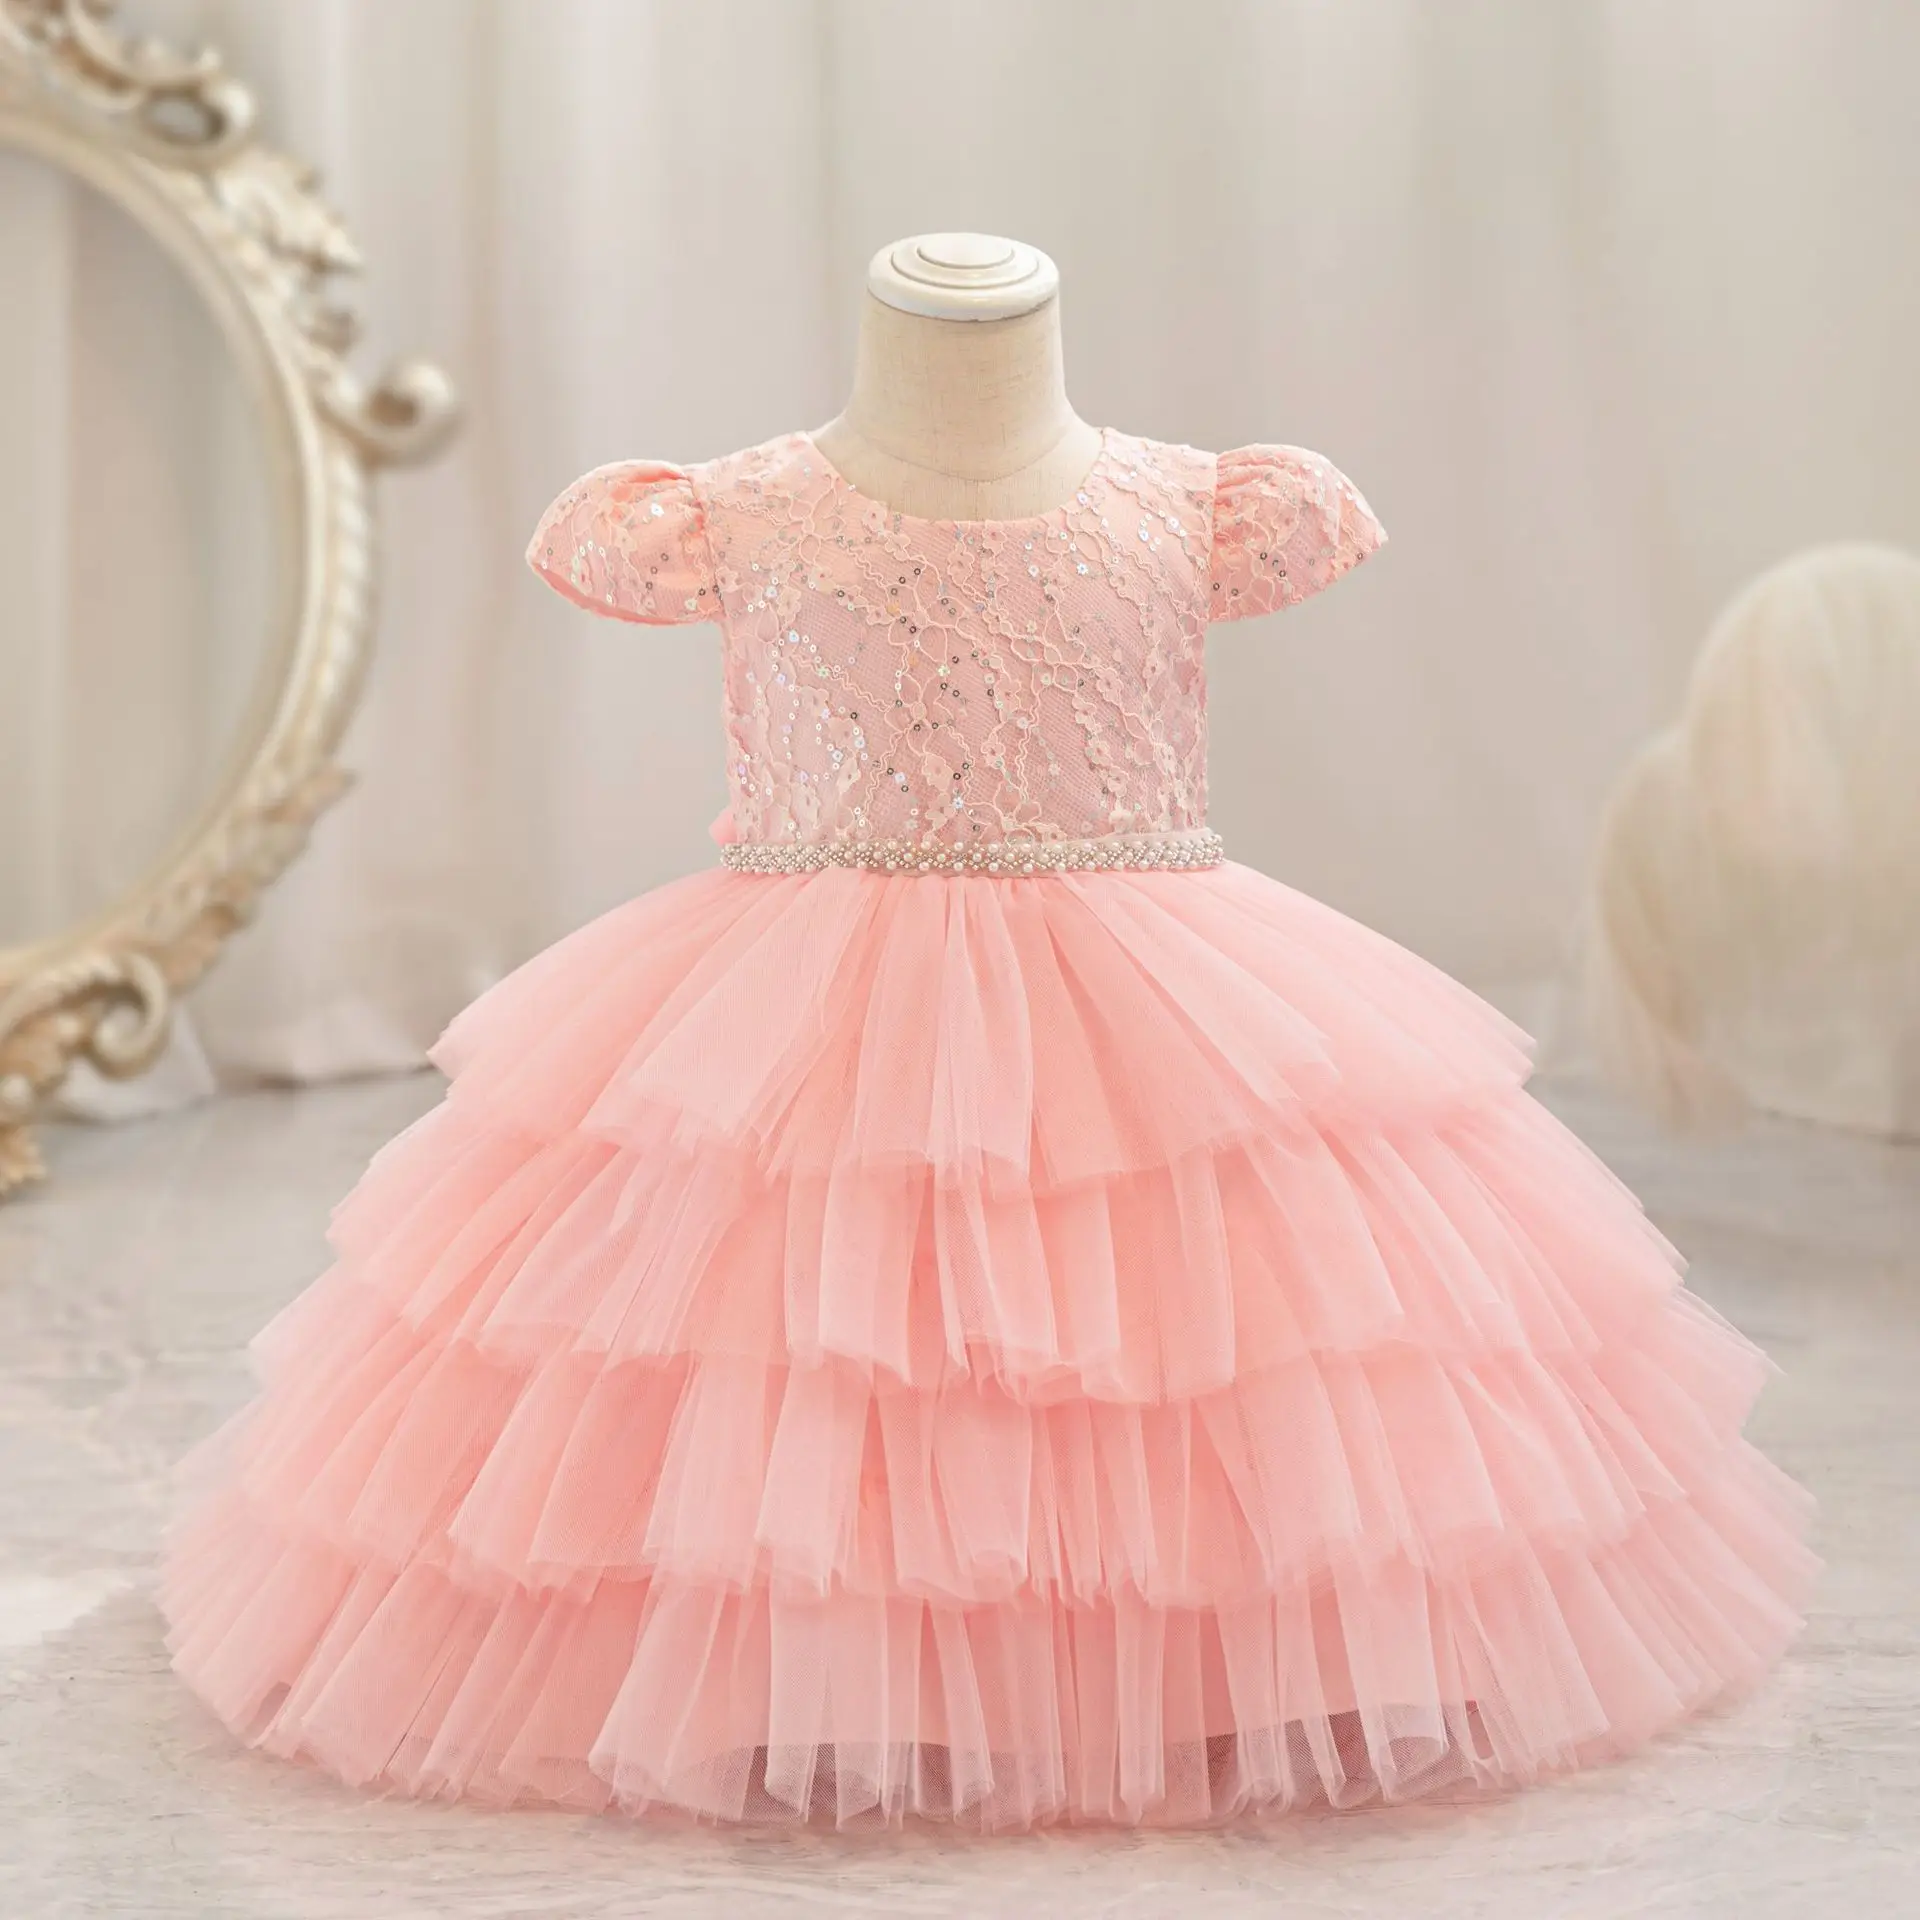 

Baby Girl Weekend Birthday Party Princess Dress Mesh Sequined Children's Layered Wedding Costume Kids Sweetheart Clothes 6M-4T